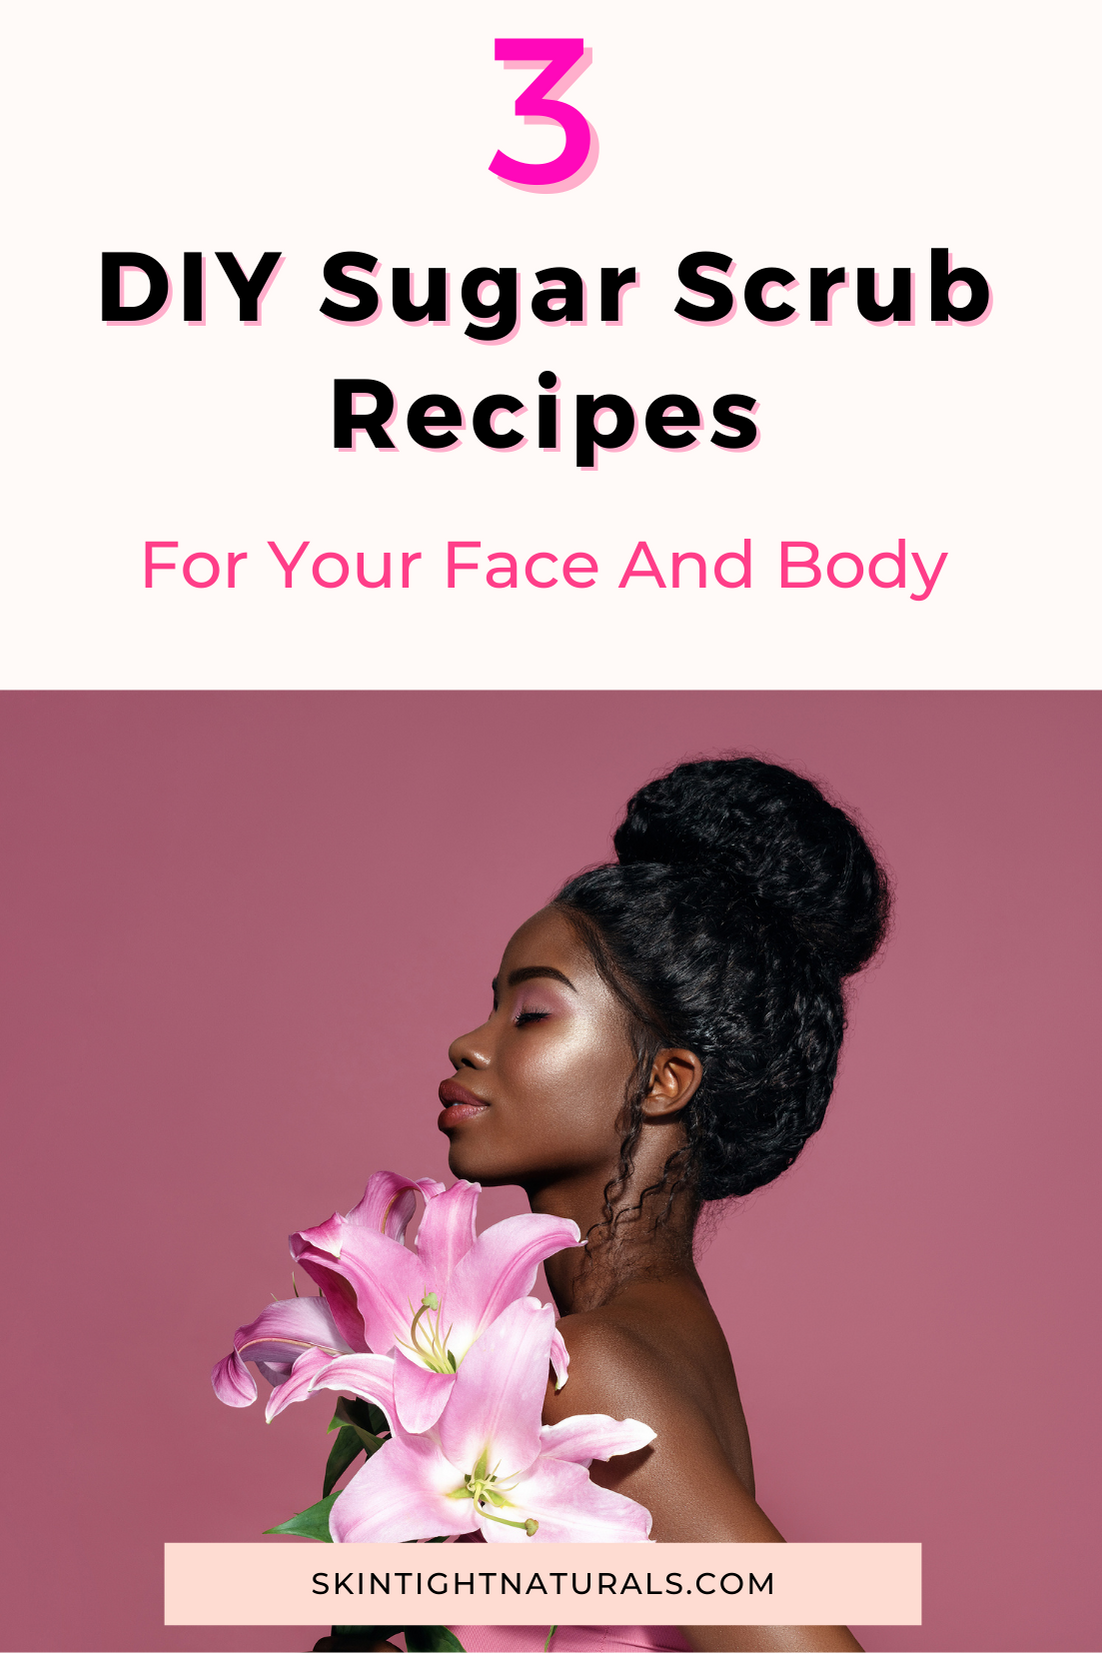 3 DIY SUGAR SCRUB RECIPES FOR YOUR FACE AND BODY